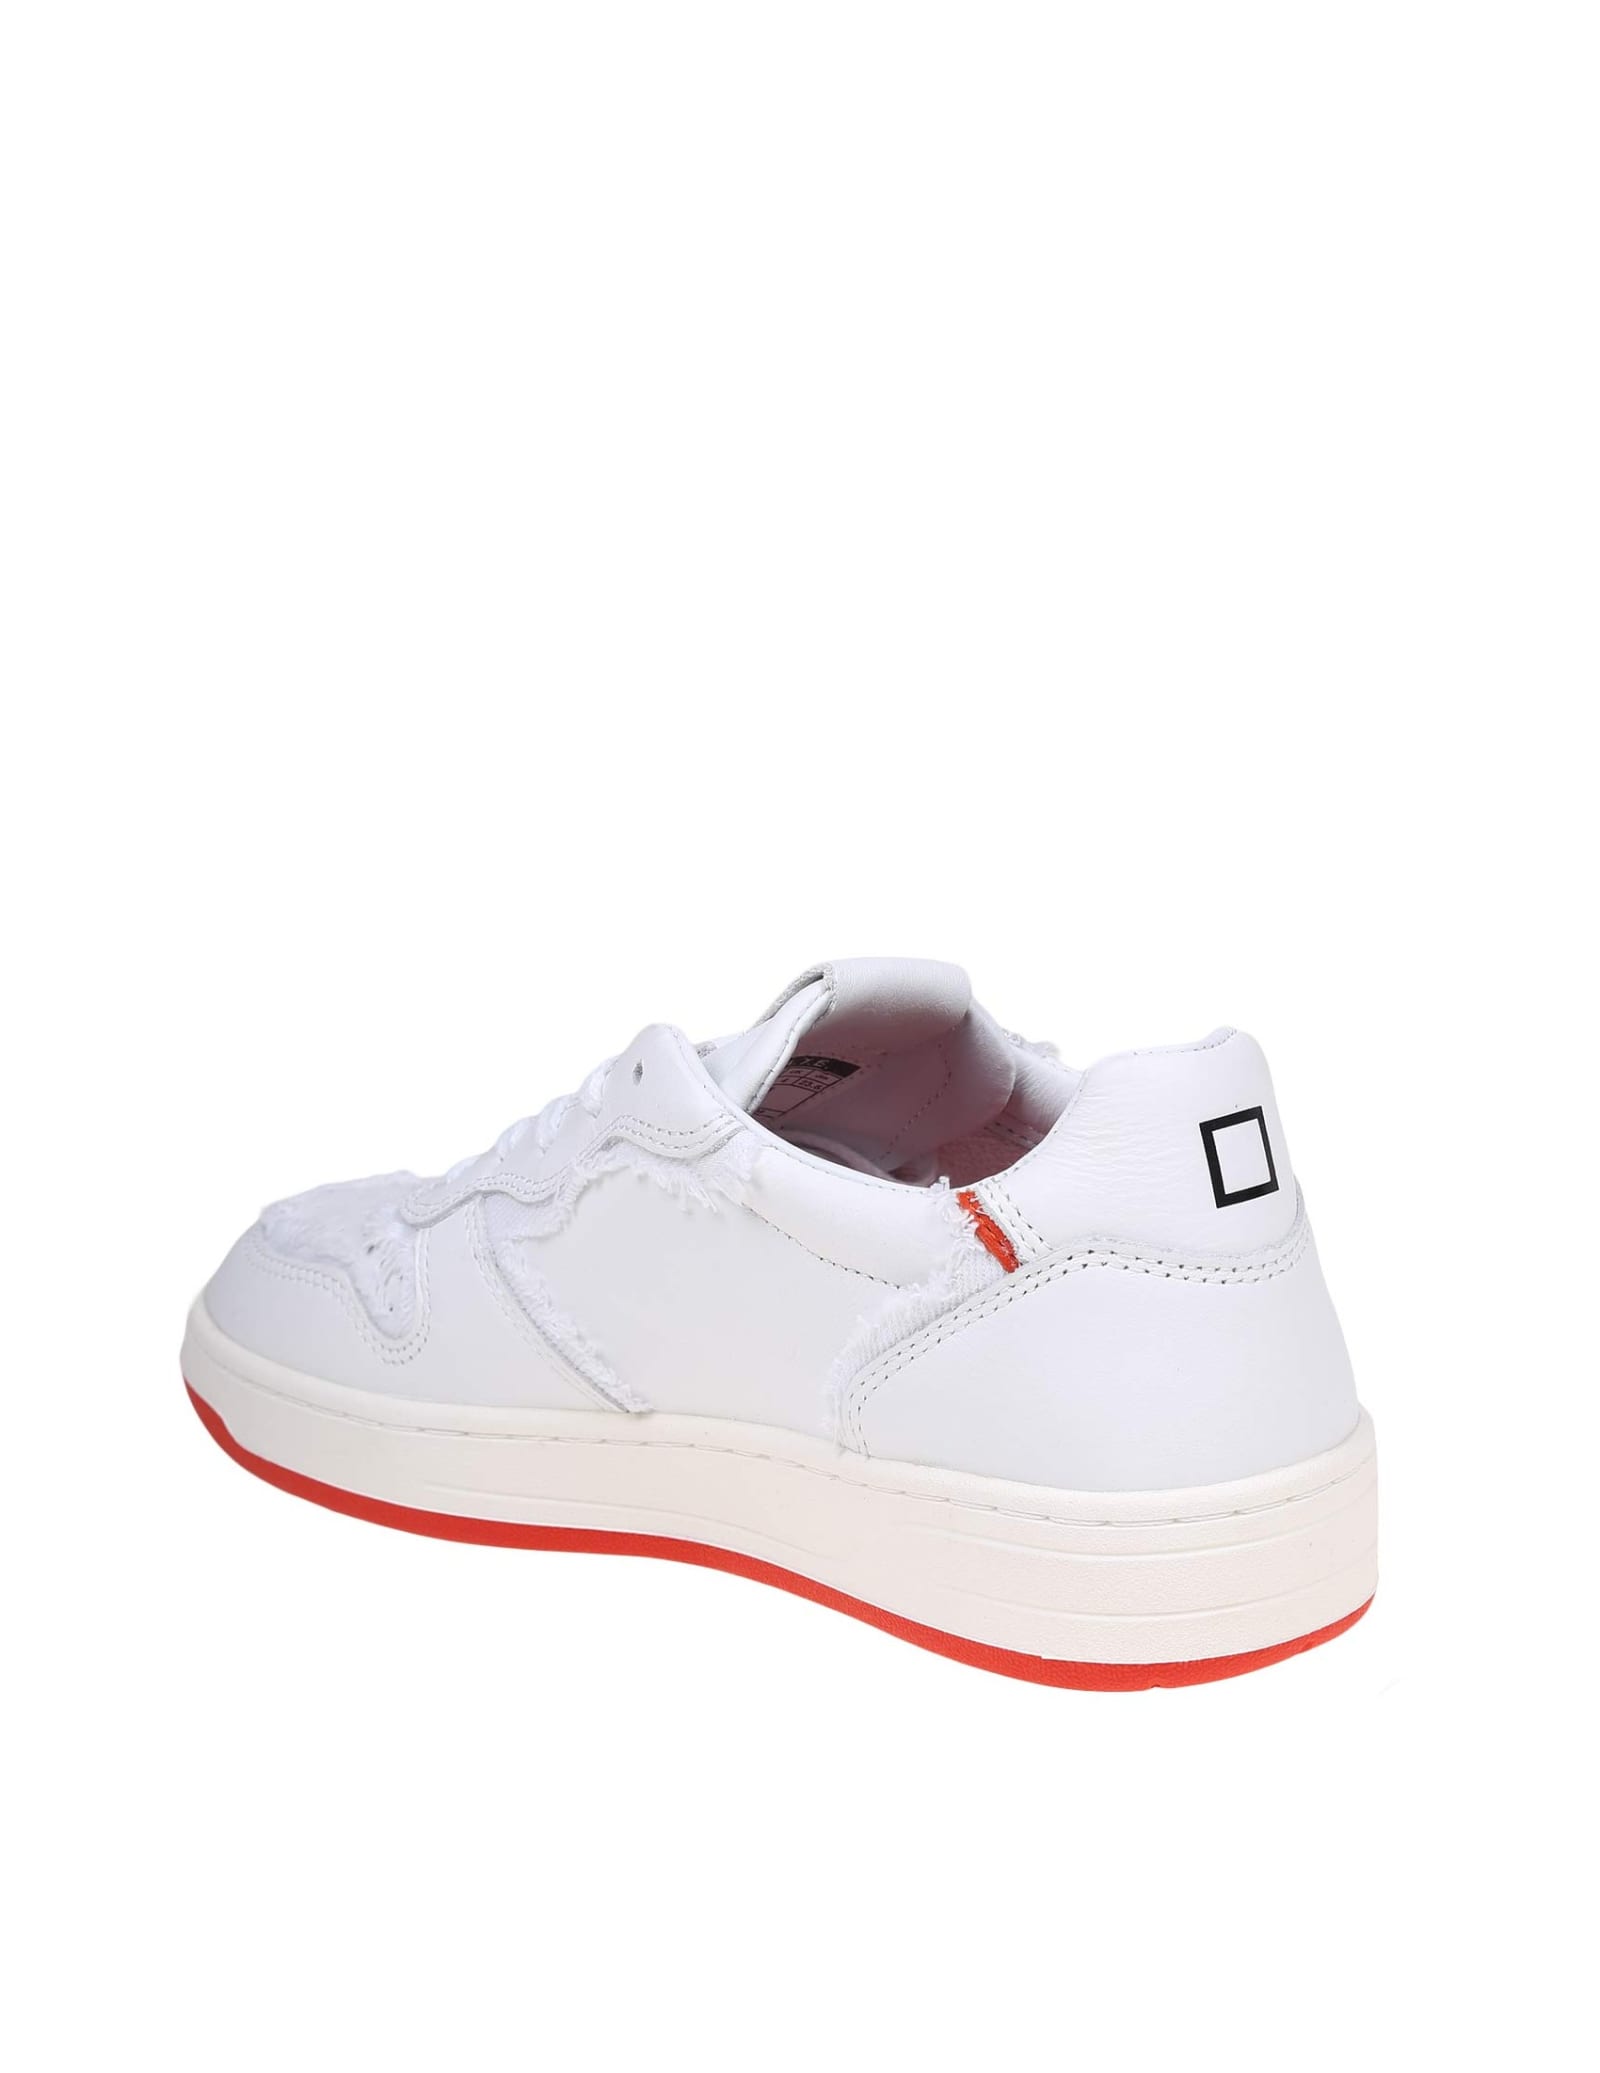 Shop Date Court Sneakers In White Leather In Cherry